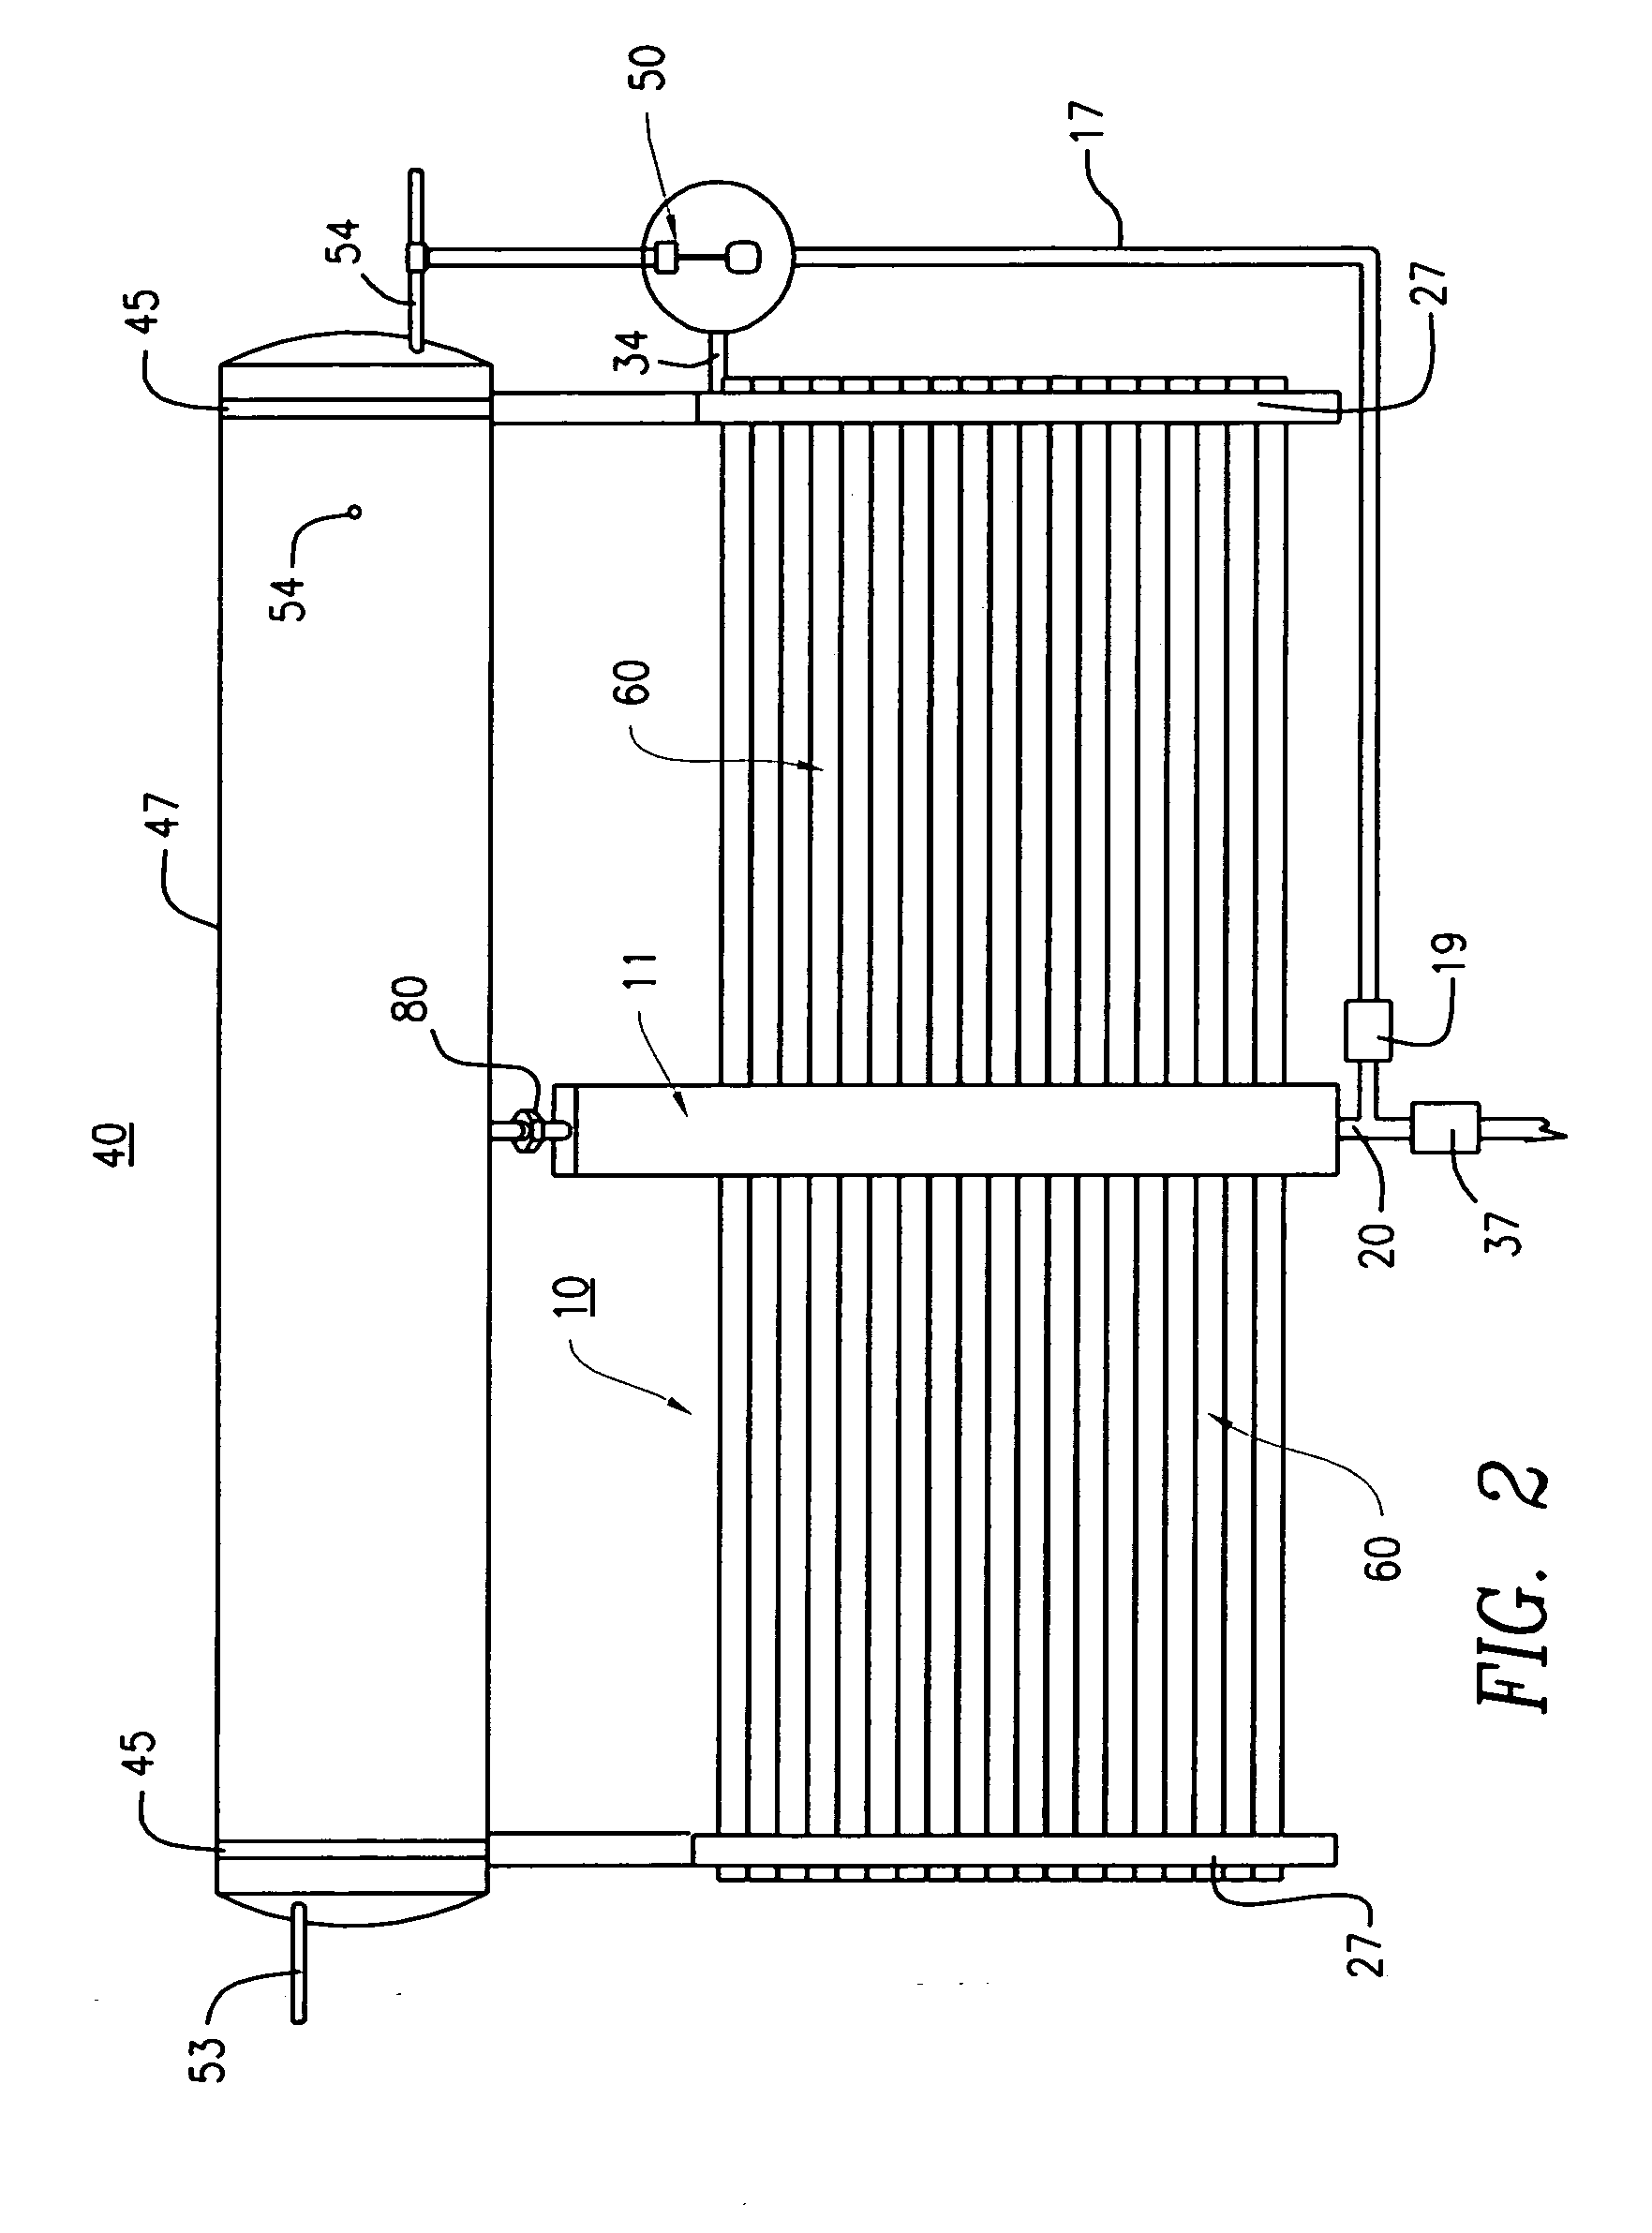 Integrated solar liquid heater, distiller and pasteurizer system